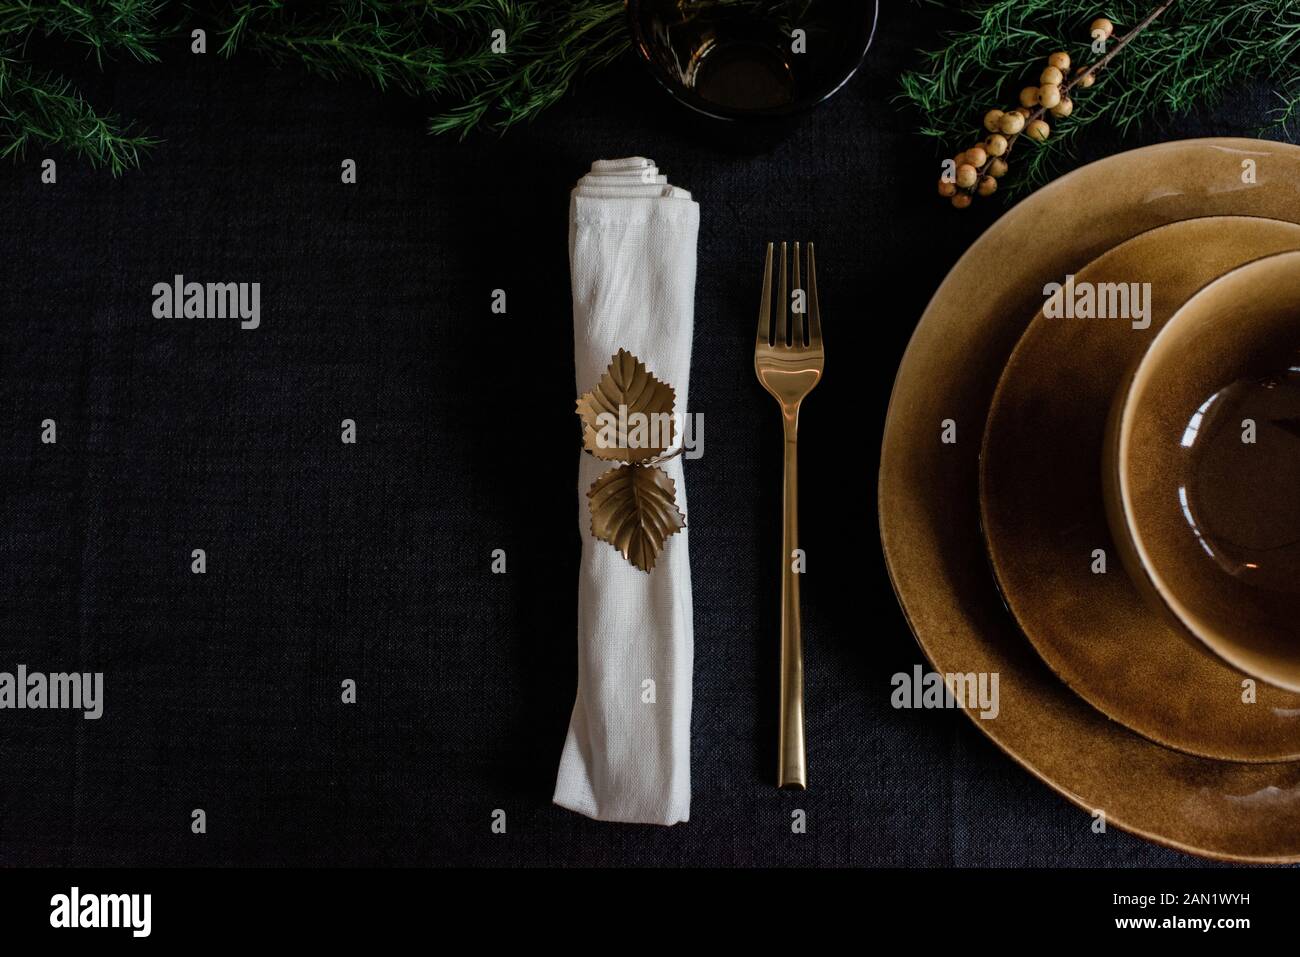 gold napkin holder, plates and fork on a decorated table setting Stock Photo